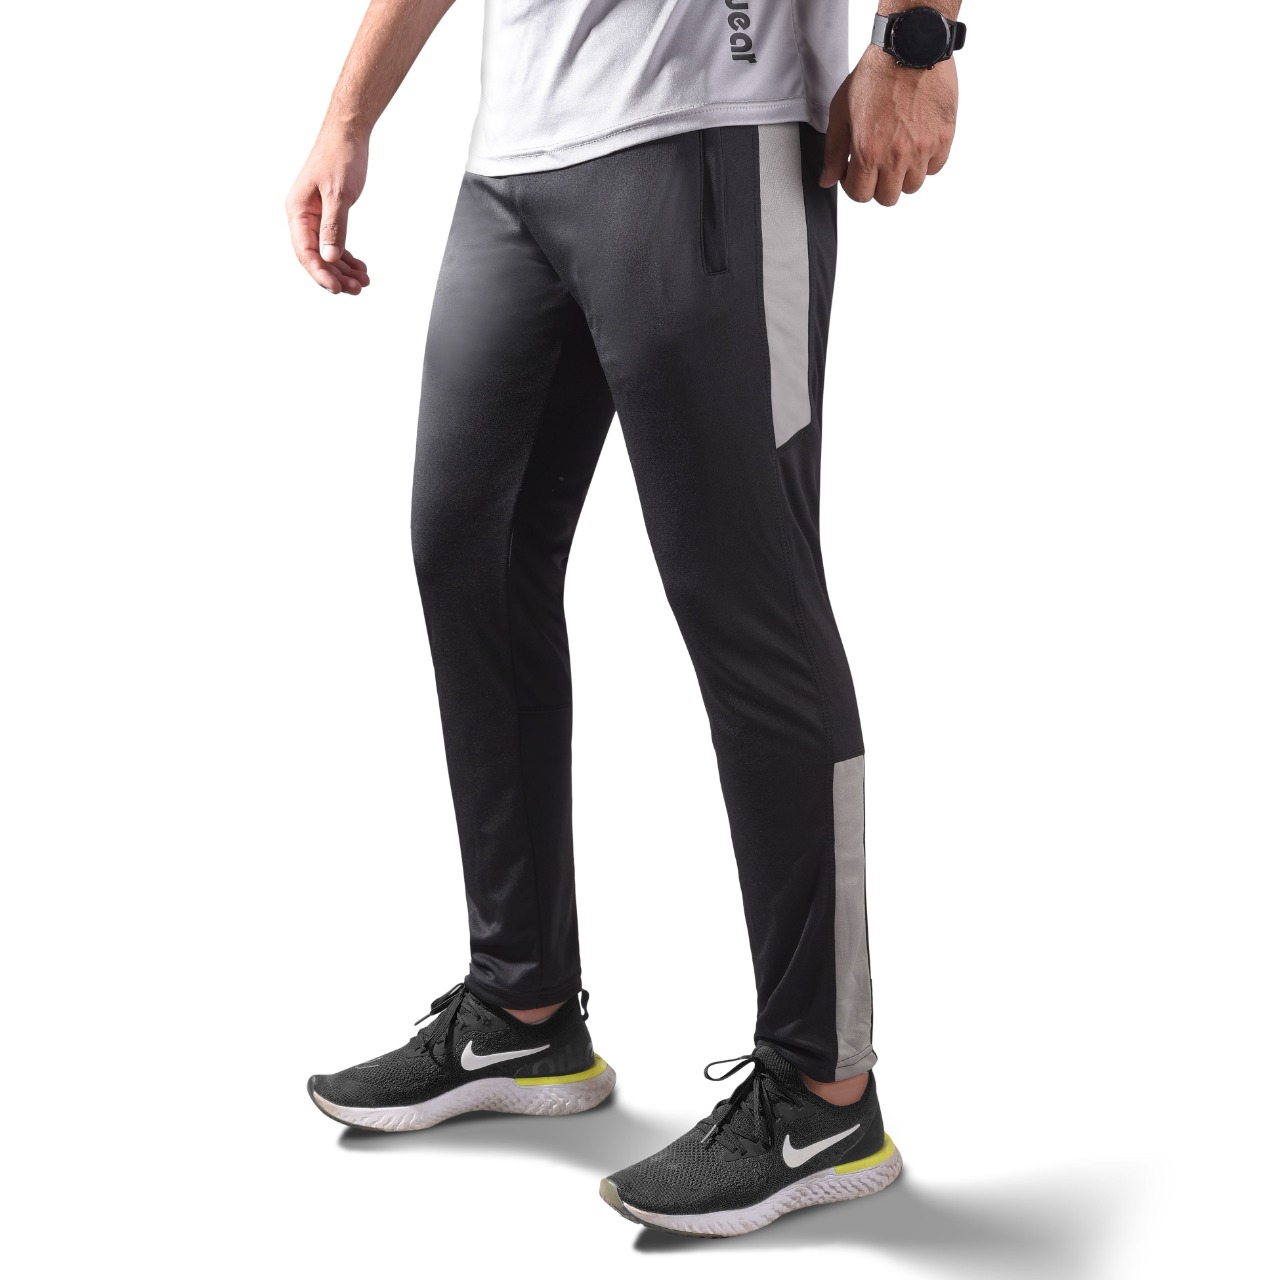 Mens Running & Gym Dry Fit Narrow Sports Training Trouser